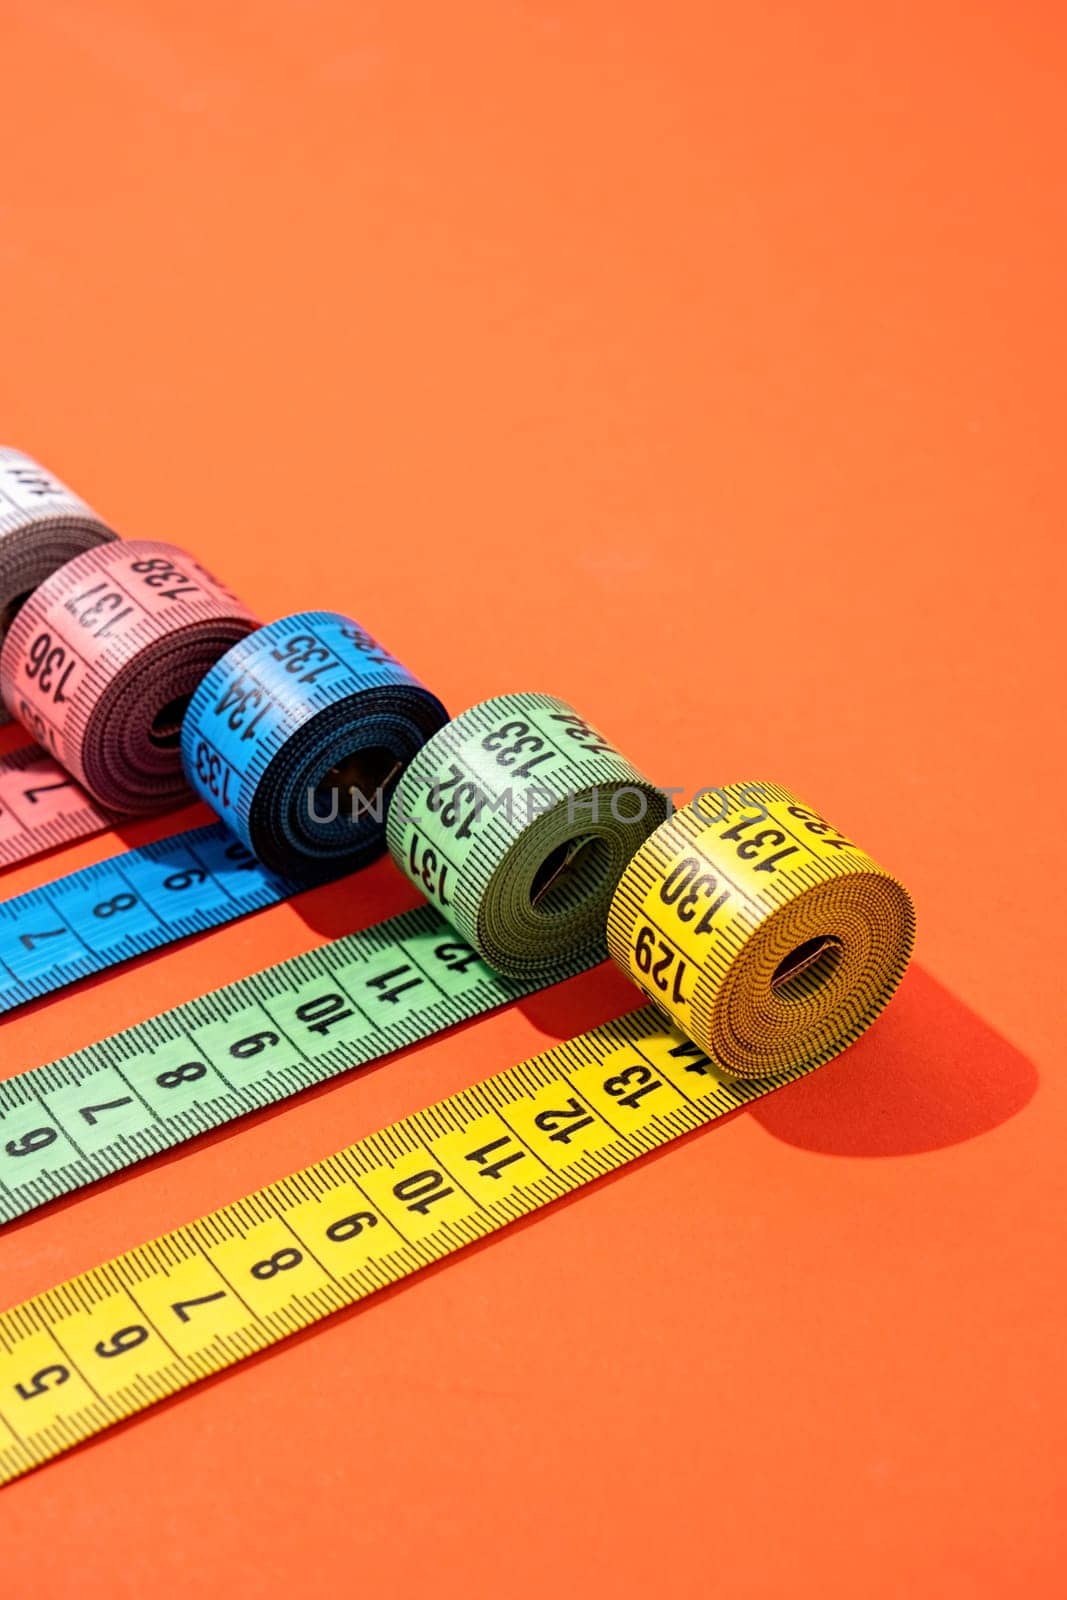 Dieting concept. colorful measuring tapes top view on bright red background, flat lay, pattern